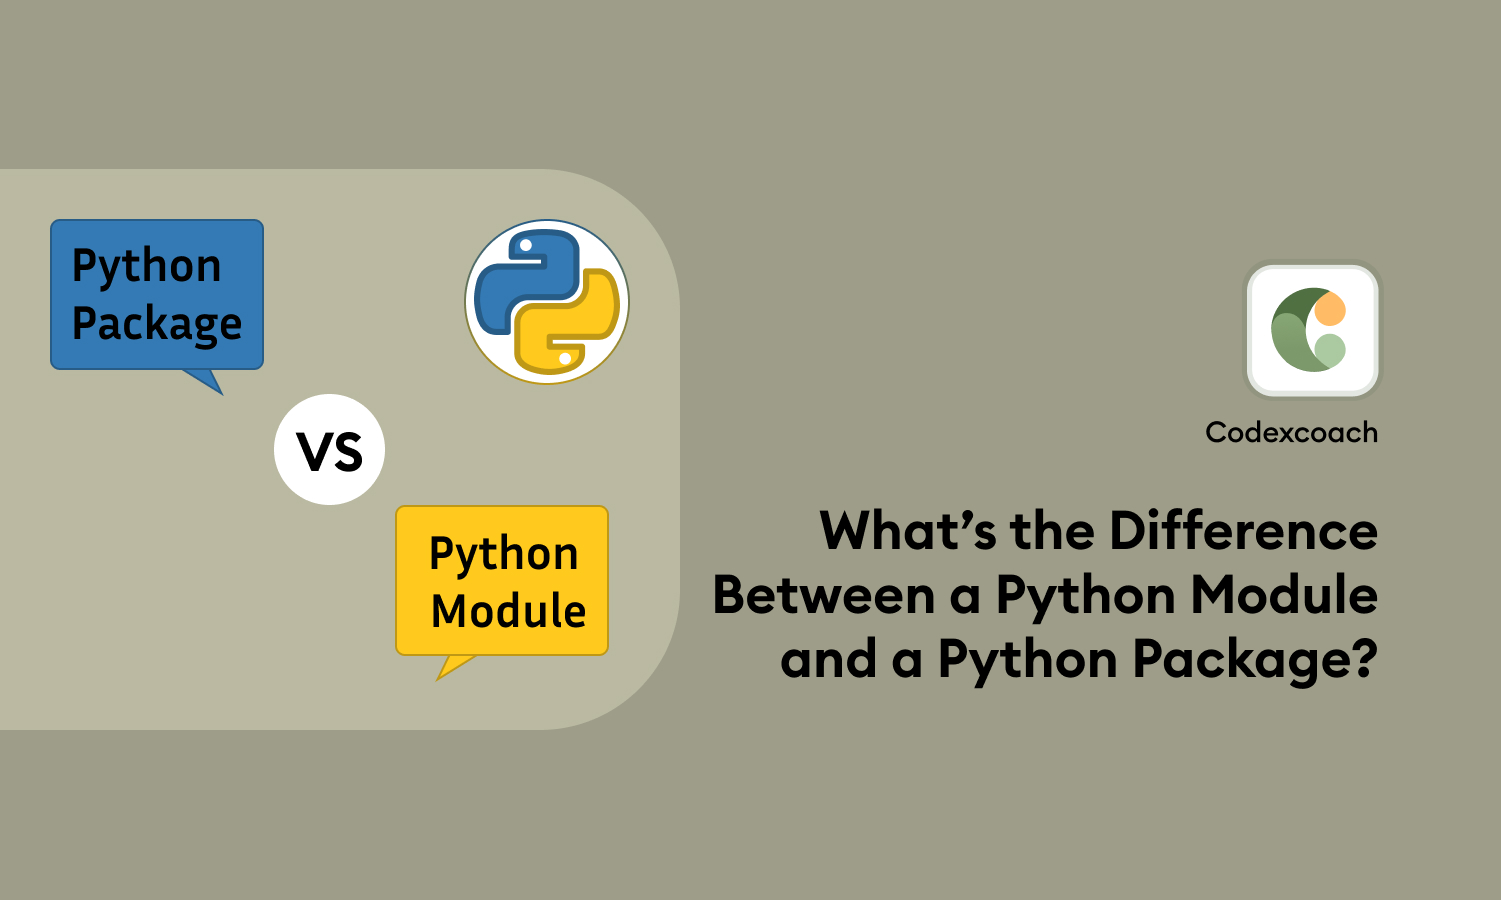 What’s the Difference Between a Python Module and a Python Package?